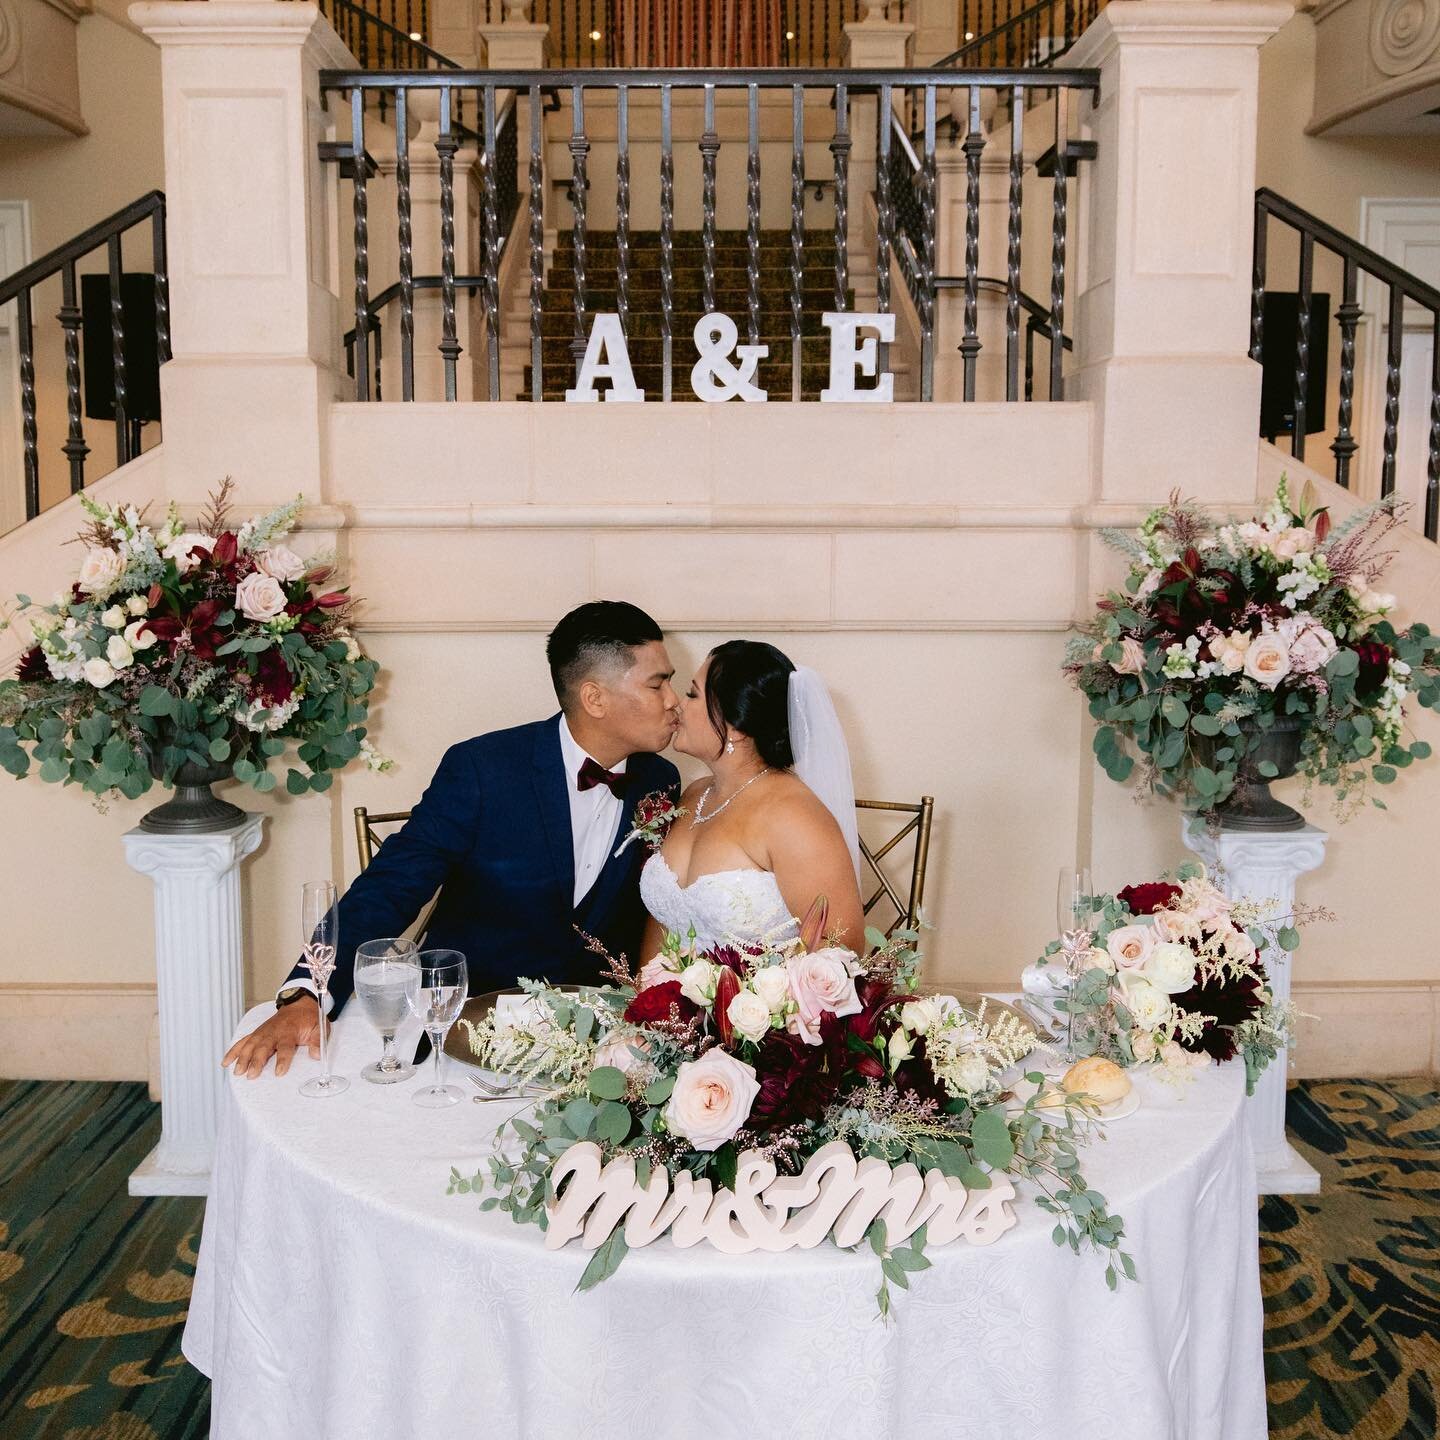 Magnificent couples are our thing! Congratulations, A +E 💜 We loved being a part of your big day! 
Venue: The Club at Ruby Hill @rubyhillevents 
Photographer: Apollo @apollofotografie 
♡
♡
♡
Join our roster by letting Magnetic Magnificent Events pla